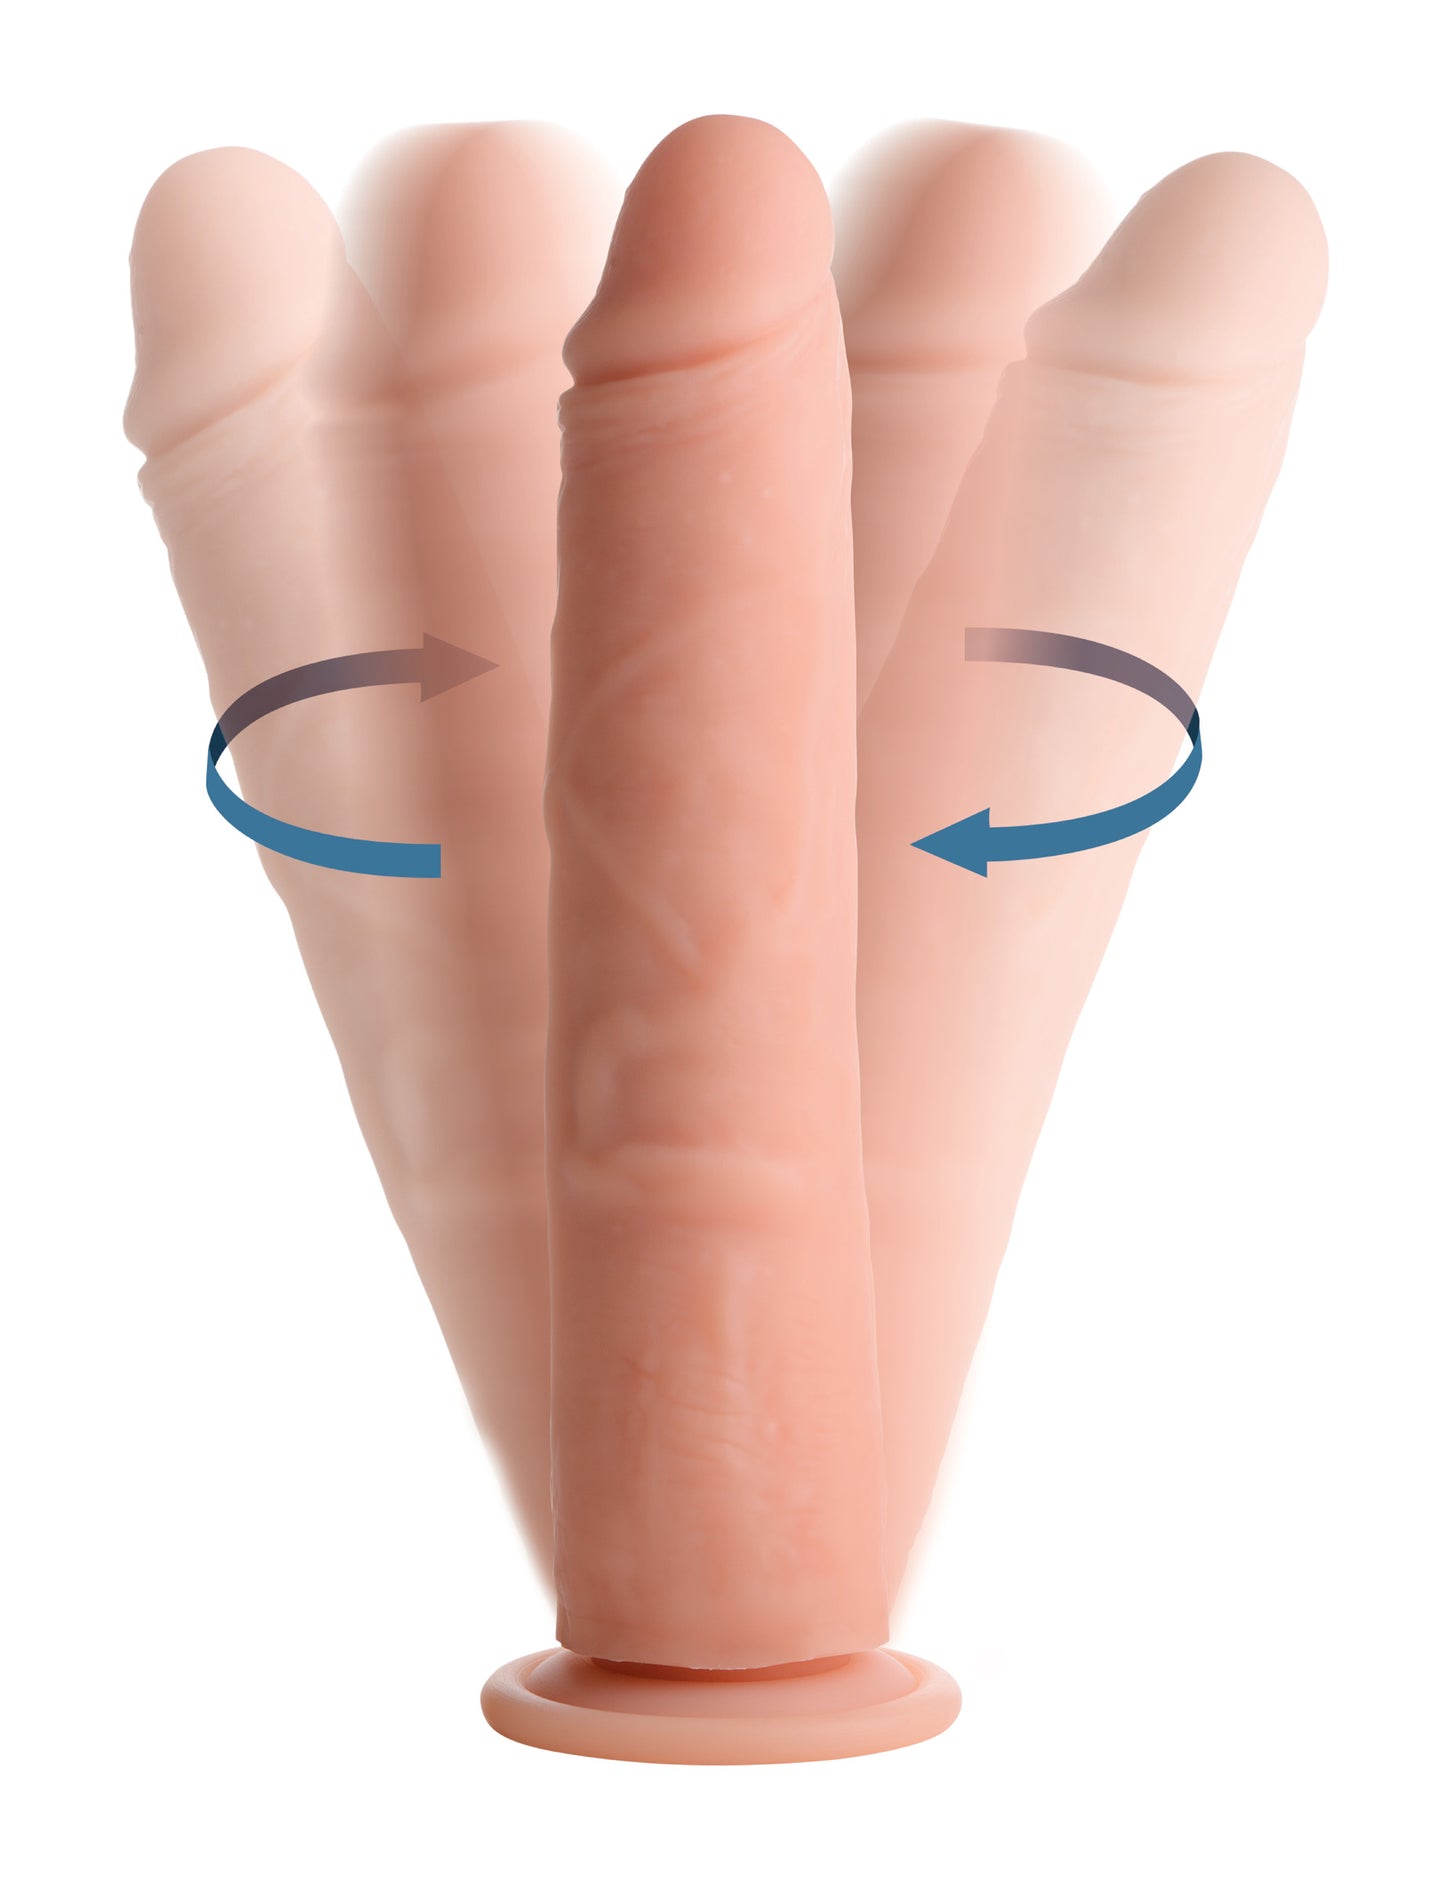 Vibrating and Rotating Remote Control Silicone Dildo - 9 Inch